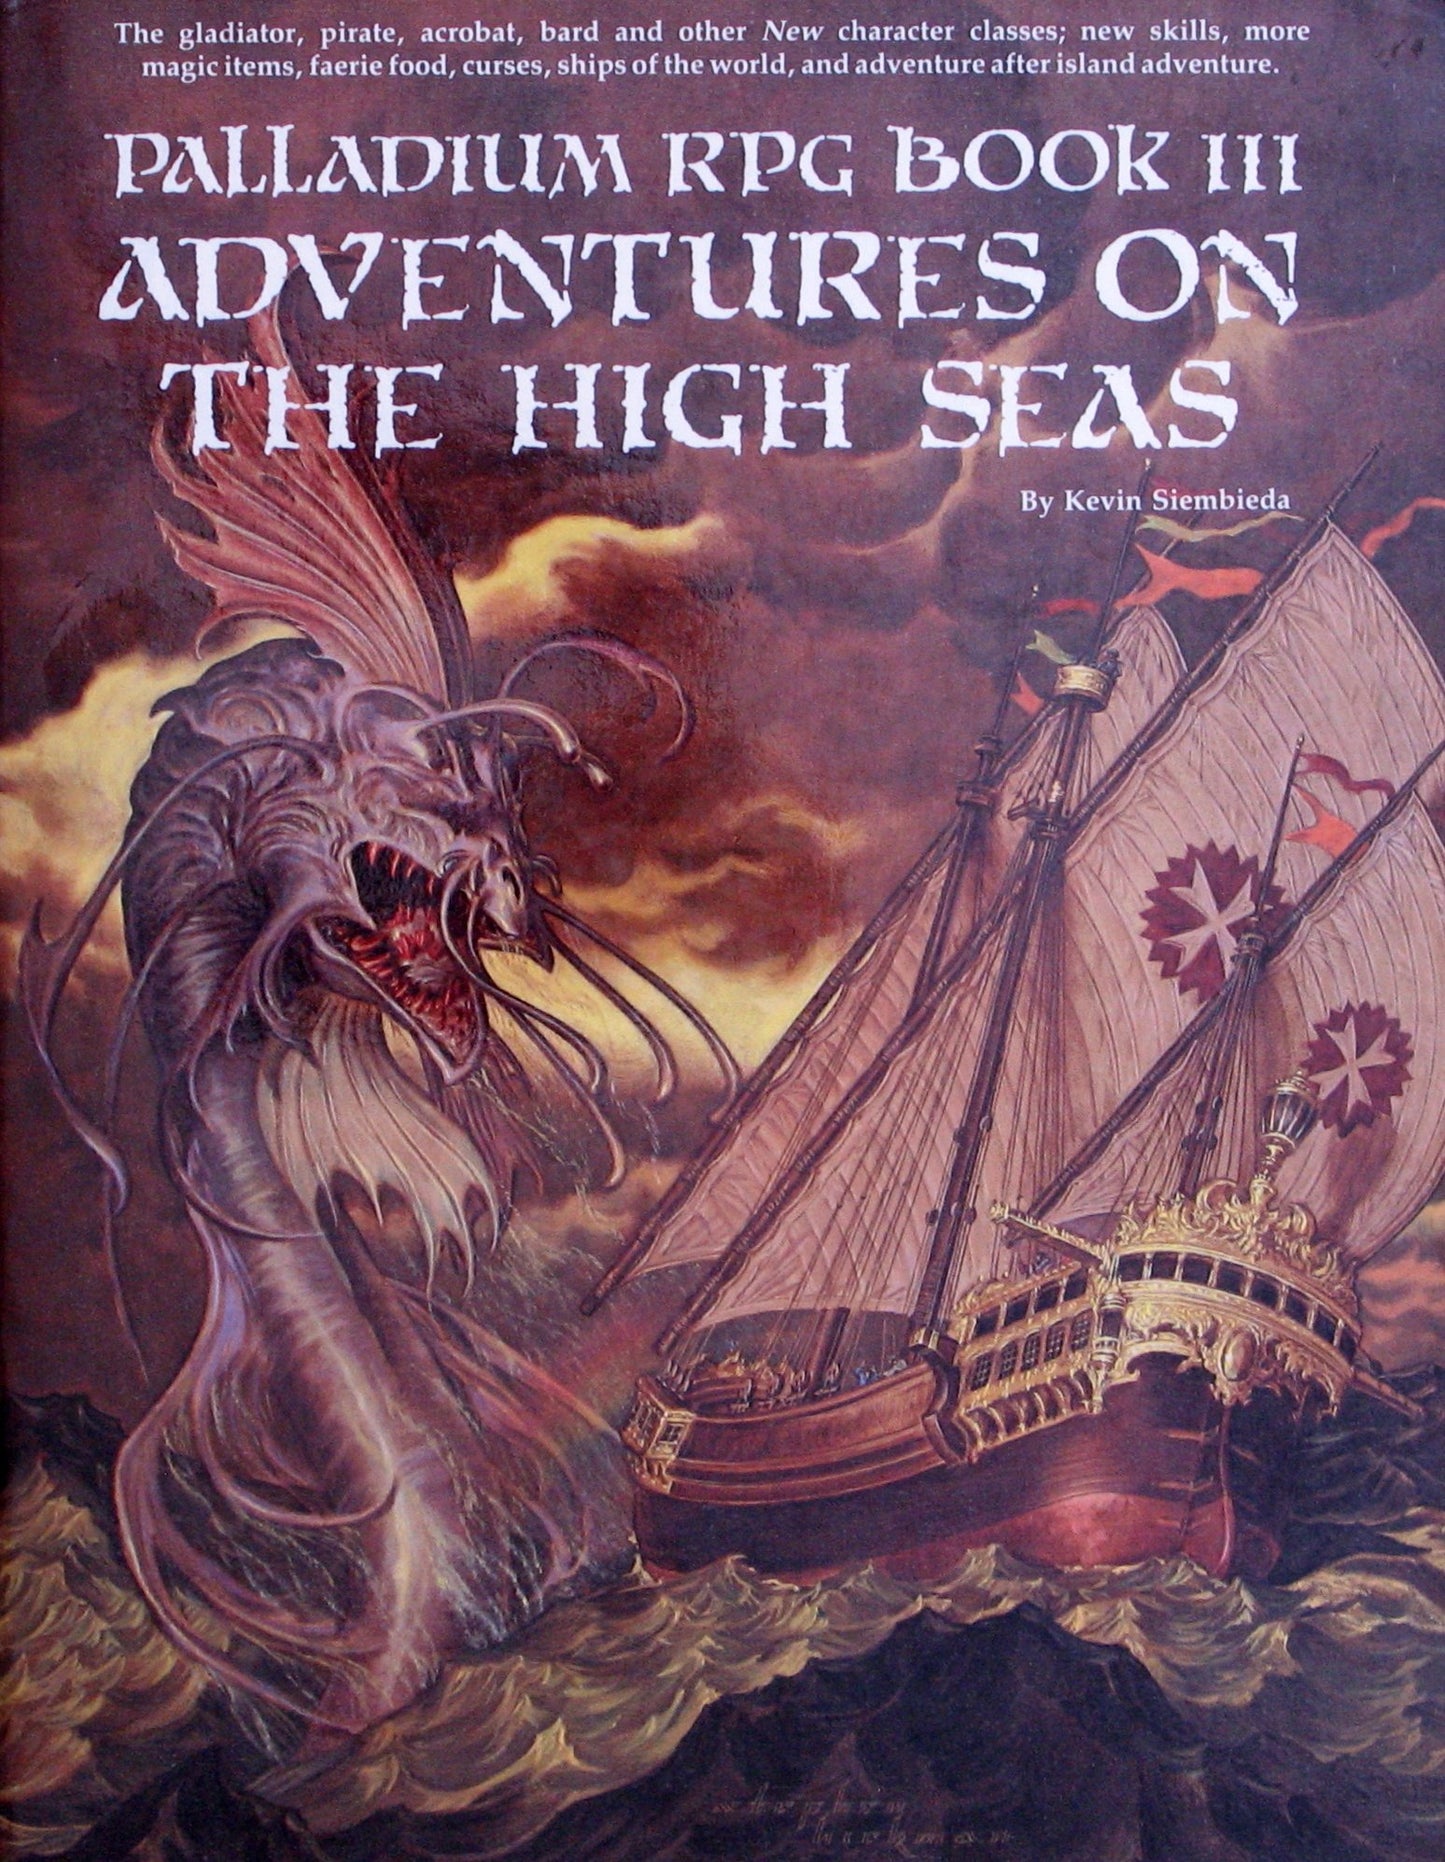 Adventures on the High Seas (Palladium Fantasy Role Playing Game, Book III)